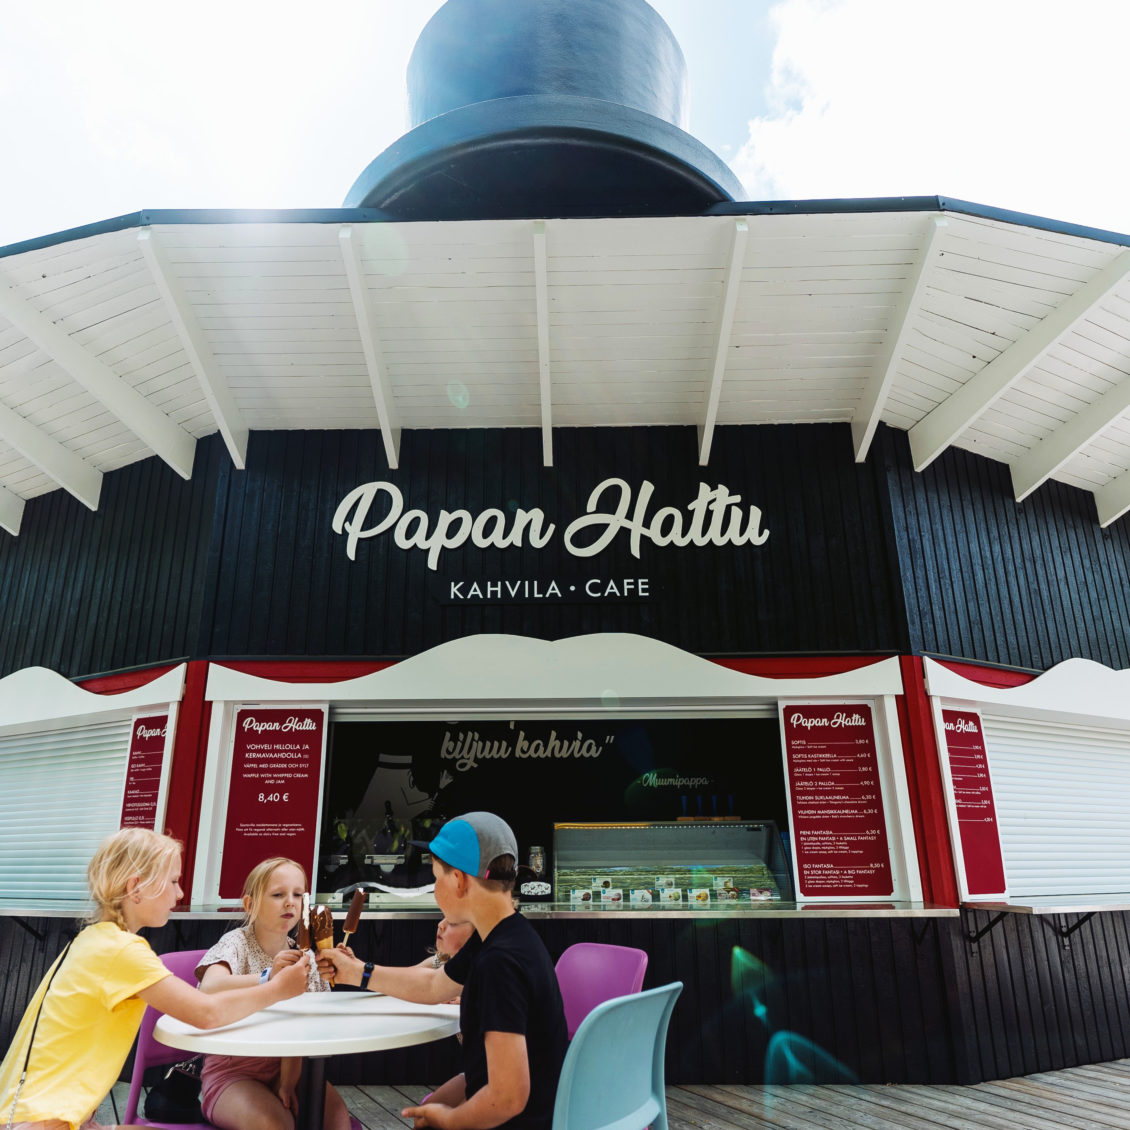 Kids are eating ice cream in the terrace of Café Pappa’s Hat